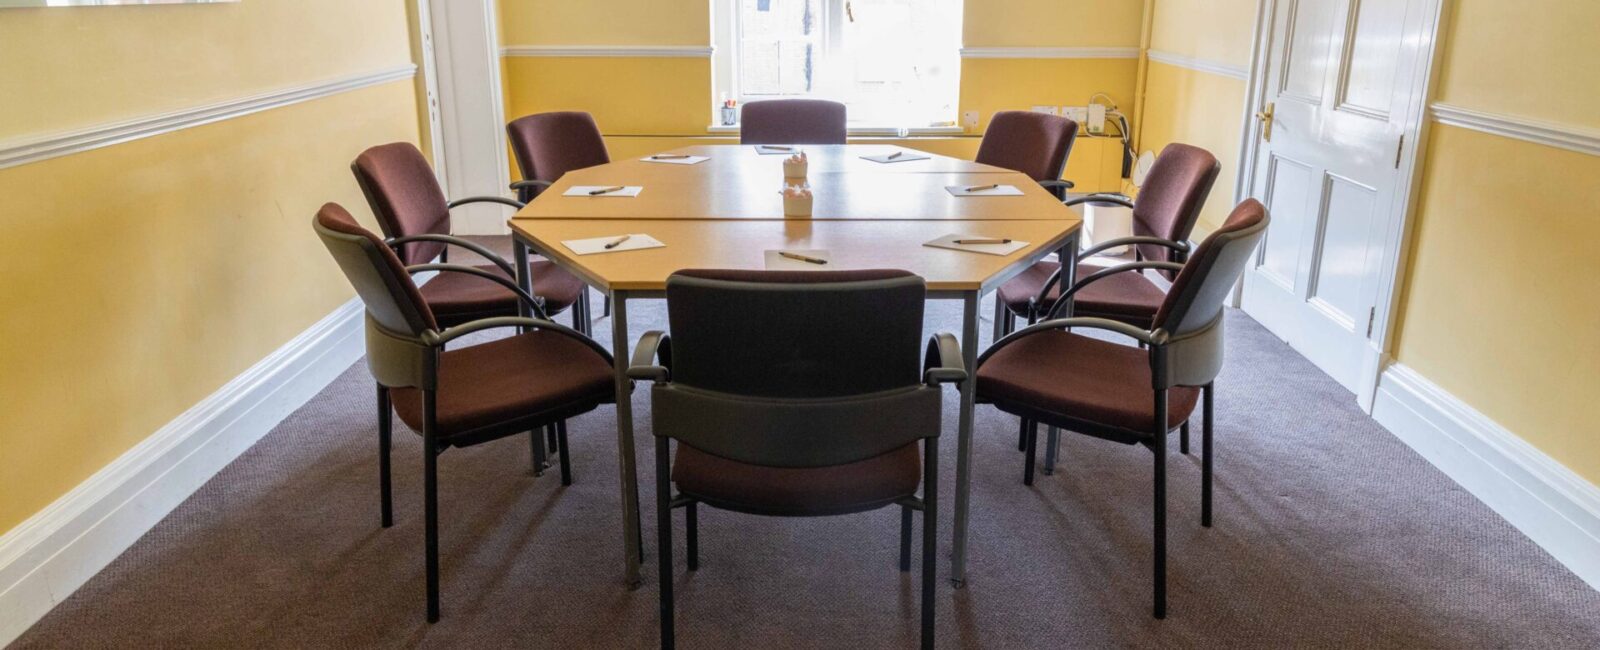 The Windham breakout room, laid out to accommodate eight people.